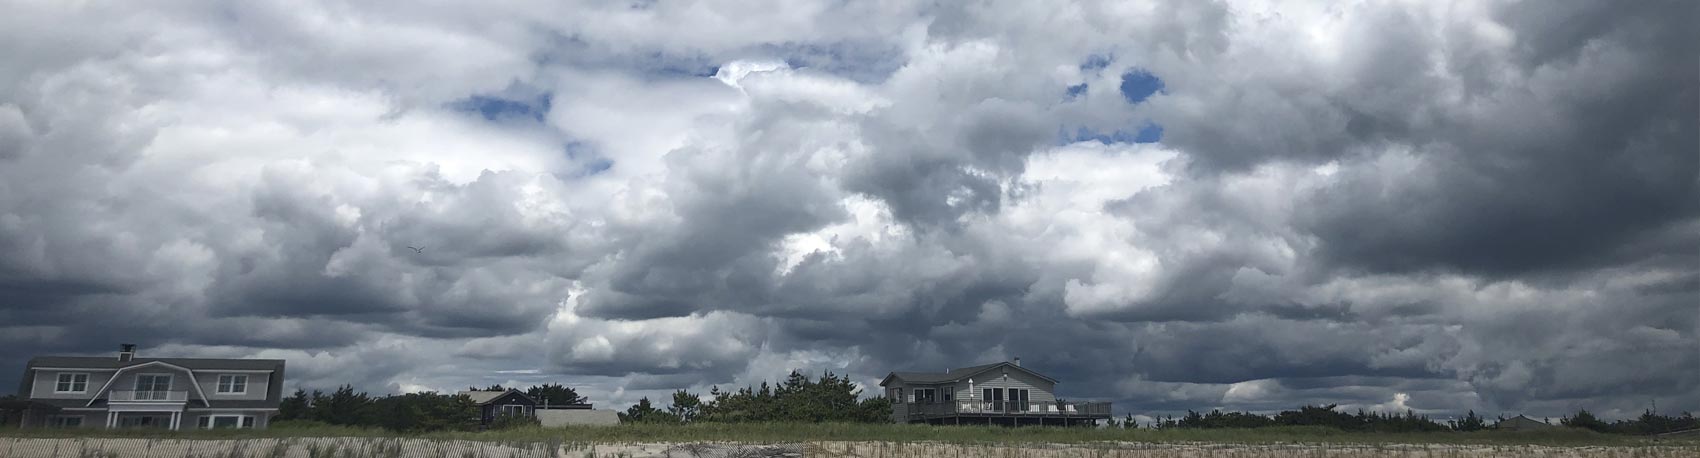 Storm Clouds-Over-Fire-Island